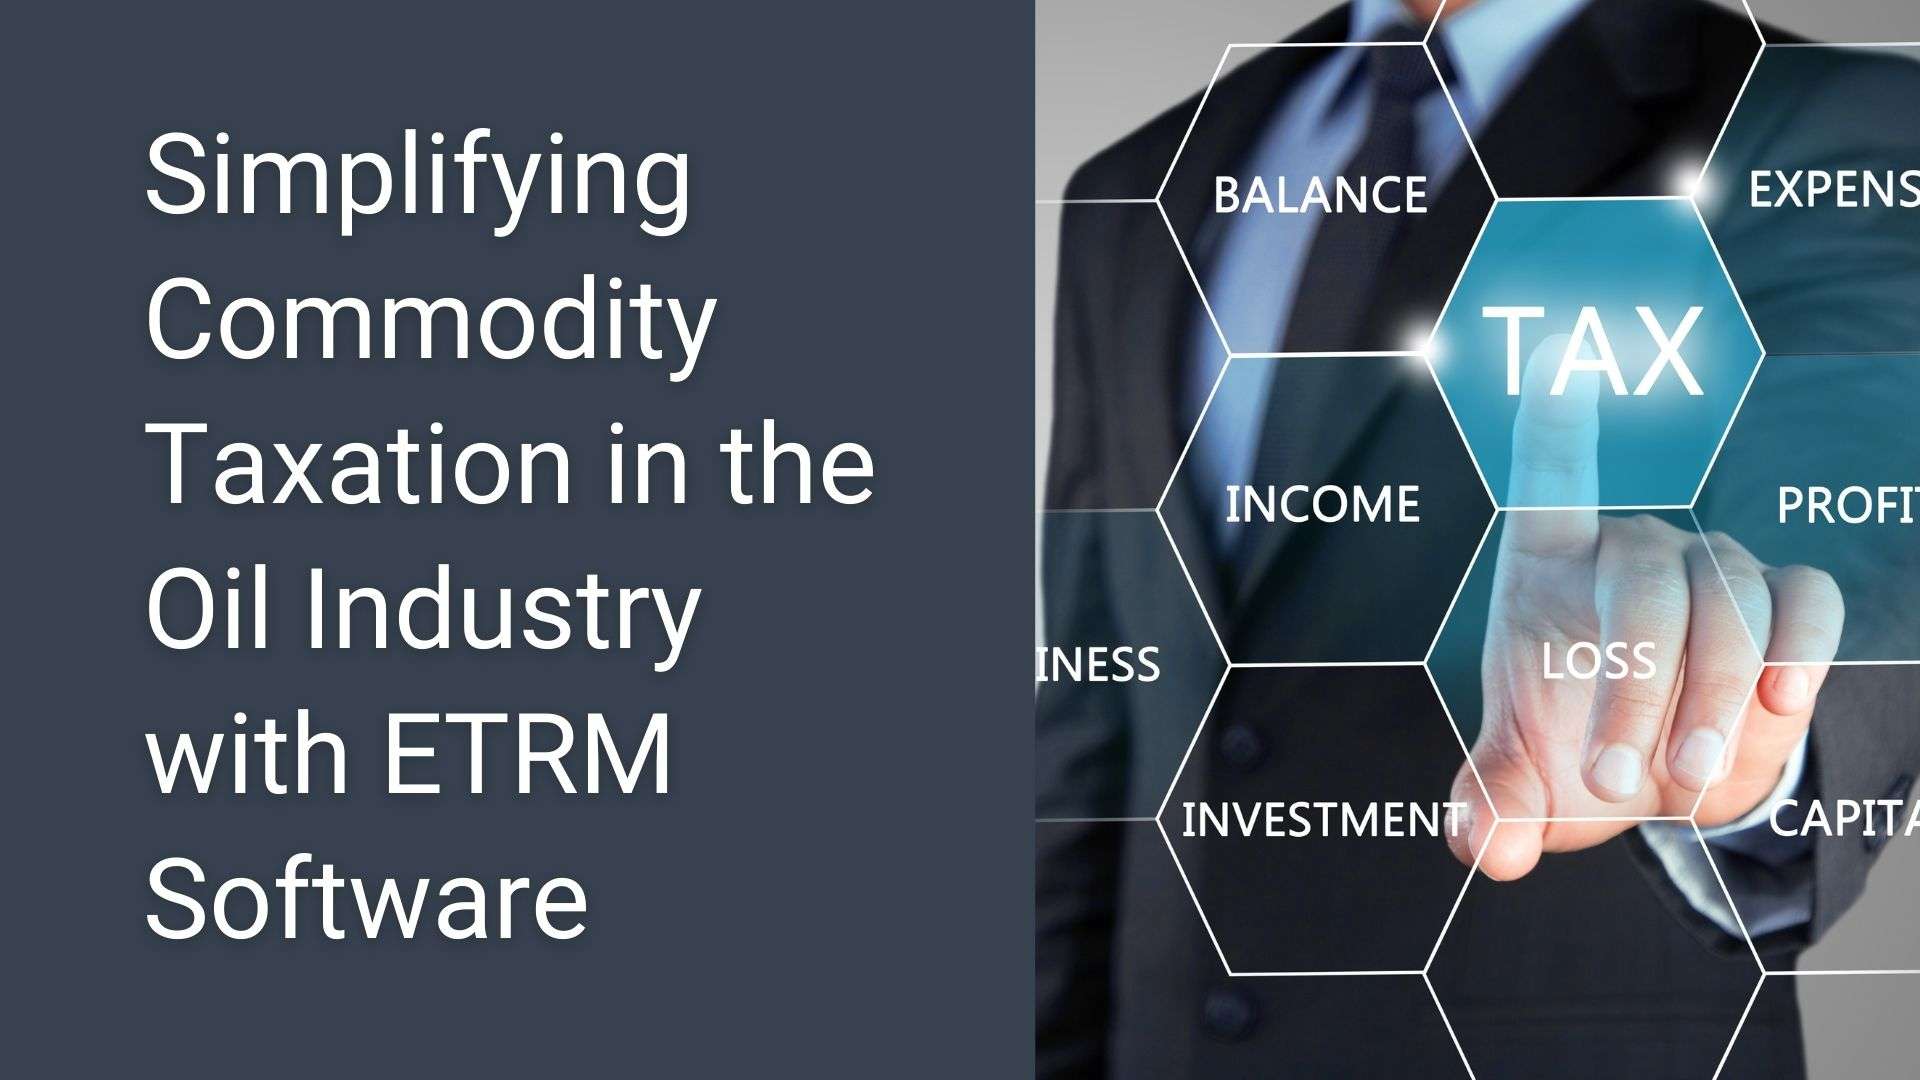 Simplifying Commodity Taxation in the Oil Industry with ETRM Software